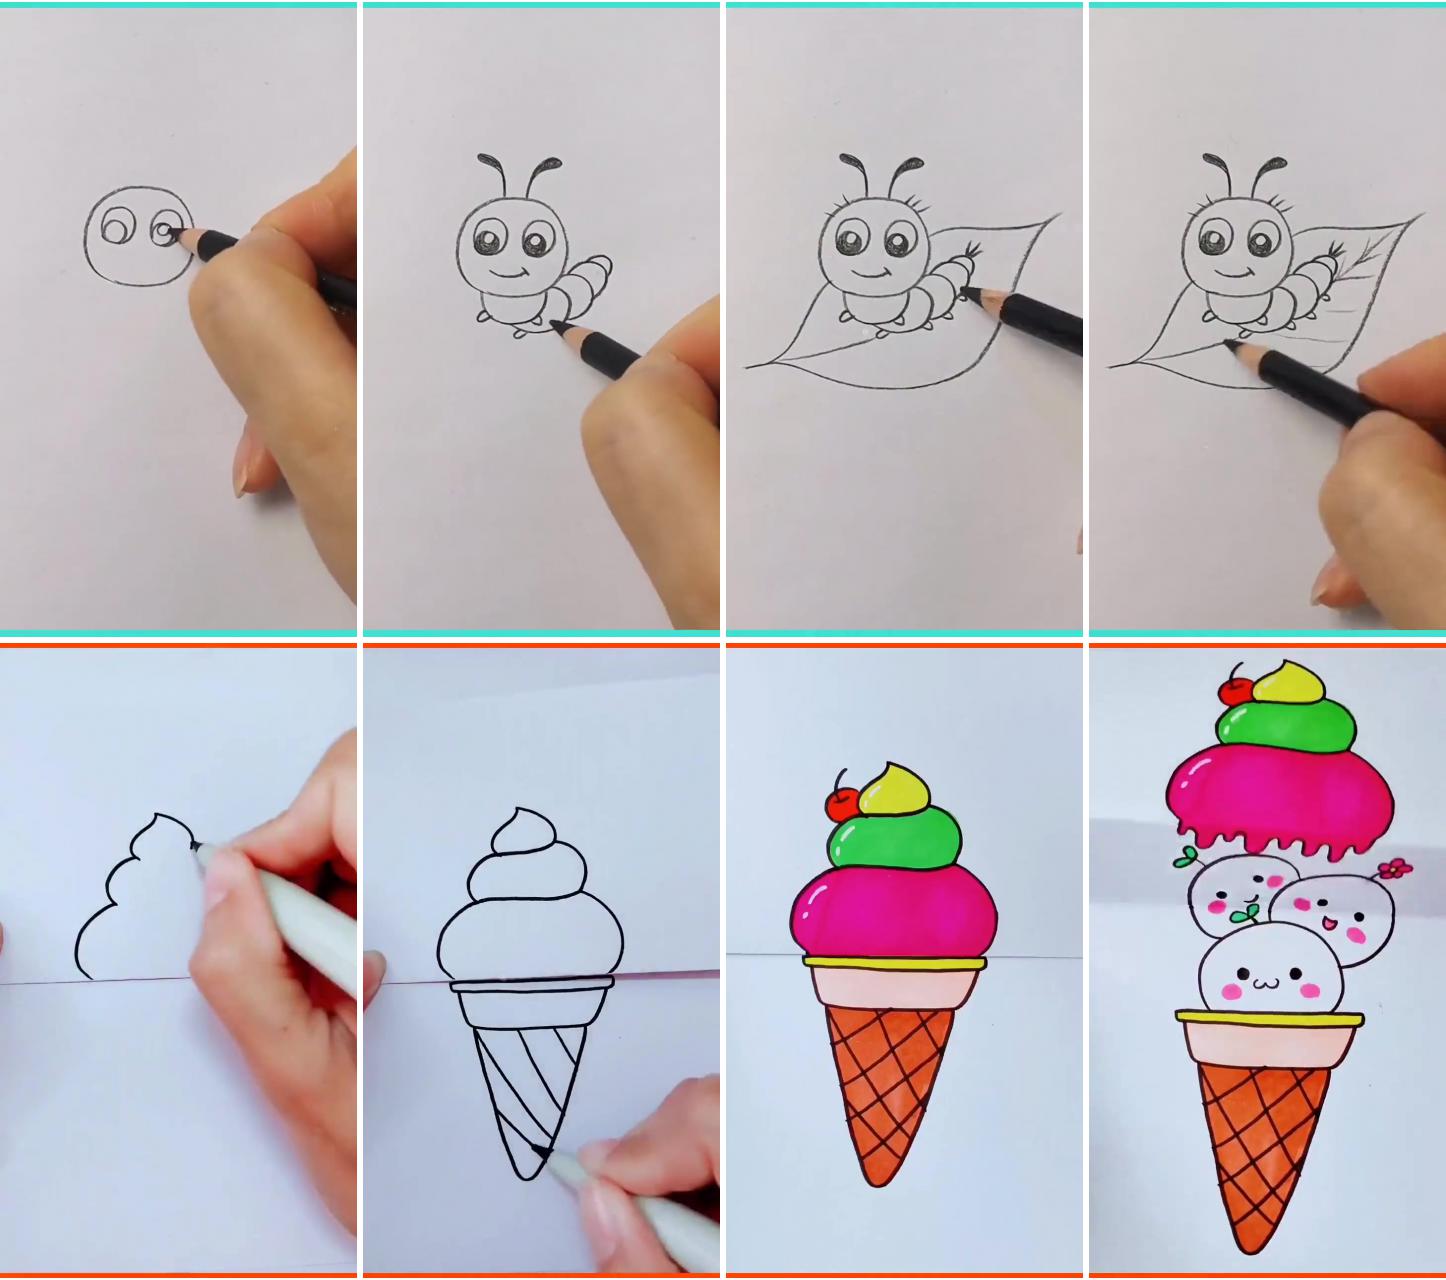 How to draw an easy caterpillar illustration | how to draw a ice cream - really easy drawing tutorial